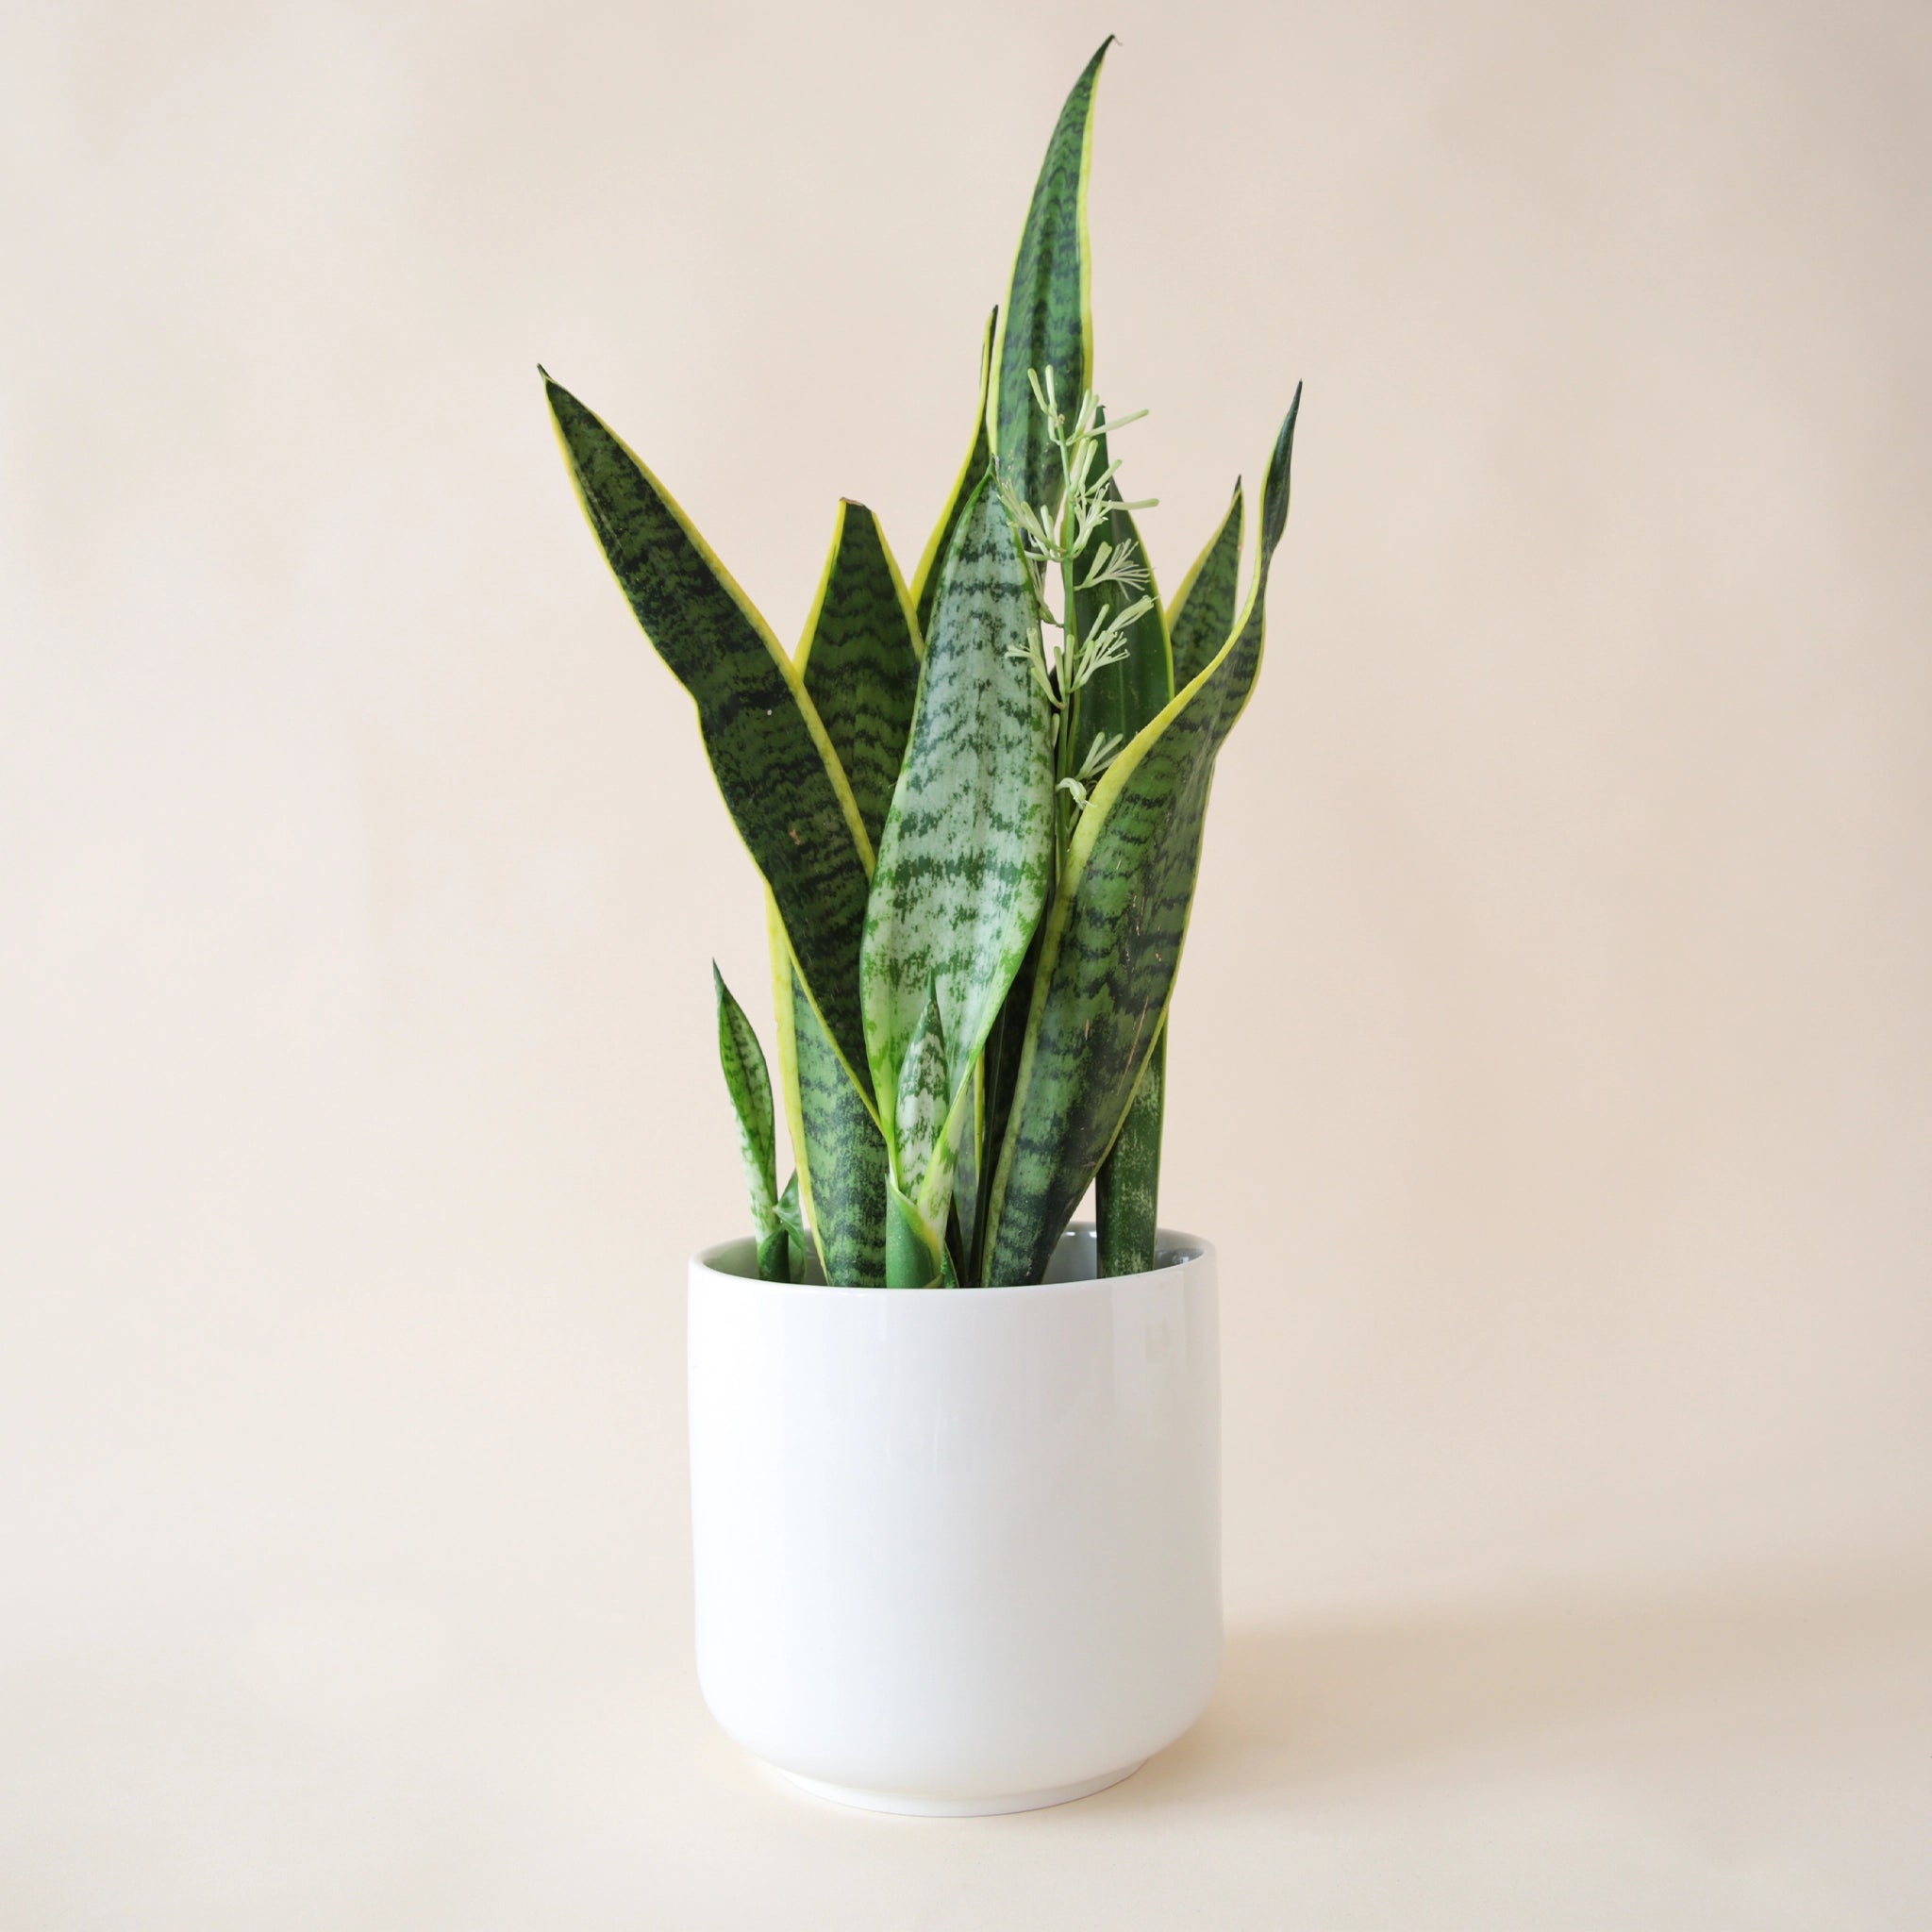 In front of a soft cream background is a white cylinder pot. Inside the pot is a sansevieria laurentii. The leaves are tall and stiff with a pointed top. They are green and light green stripes with a bright yellow border around the edges.